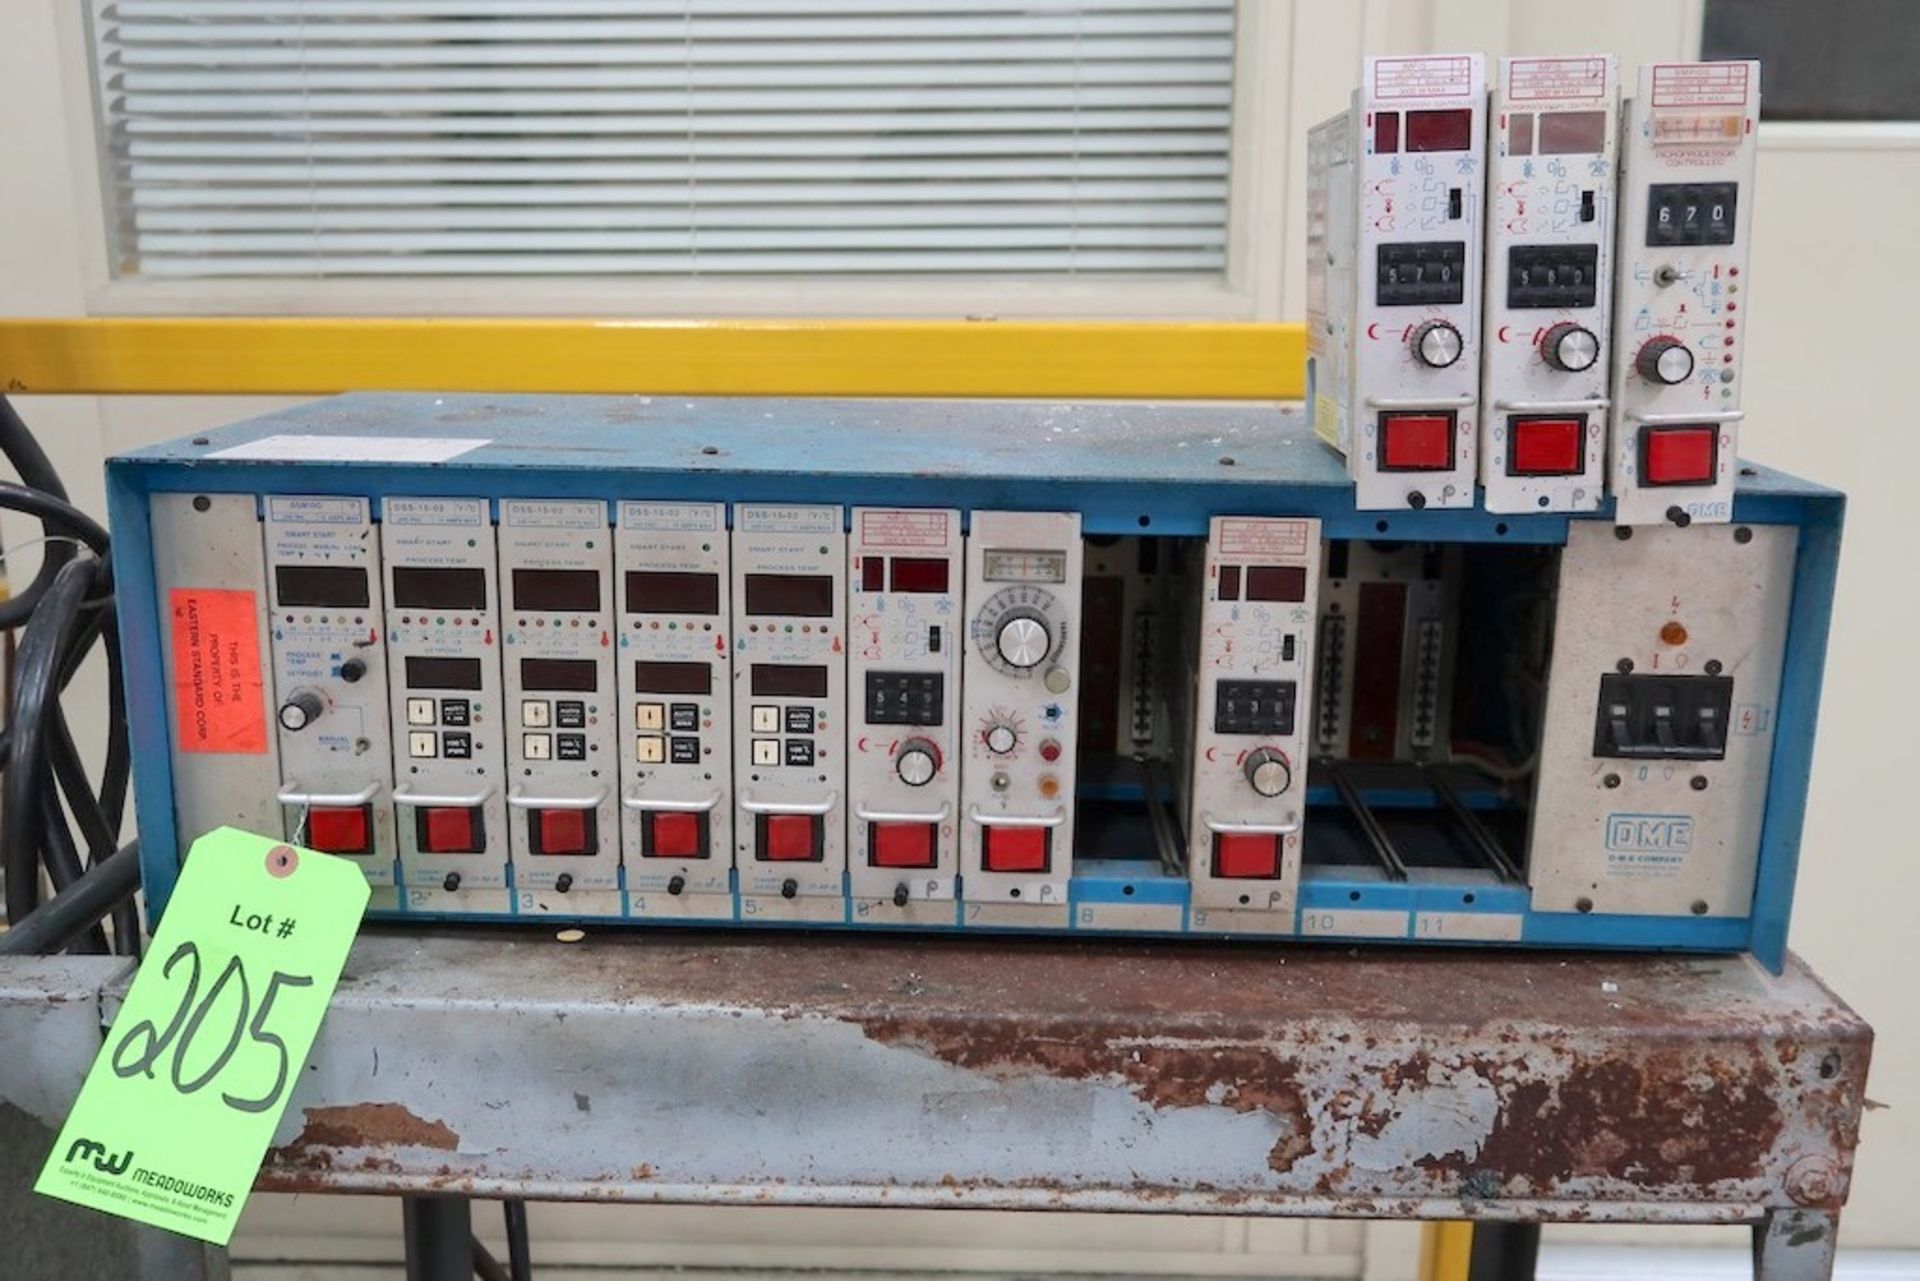 DME 12-Zone Hot Runner Controller with (7) Cards & Sorgel 45 KVA Transformer on Cart - Image 2 of 3